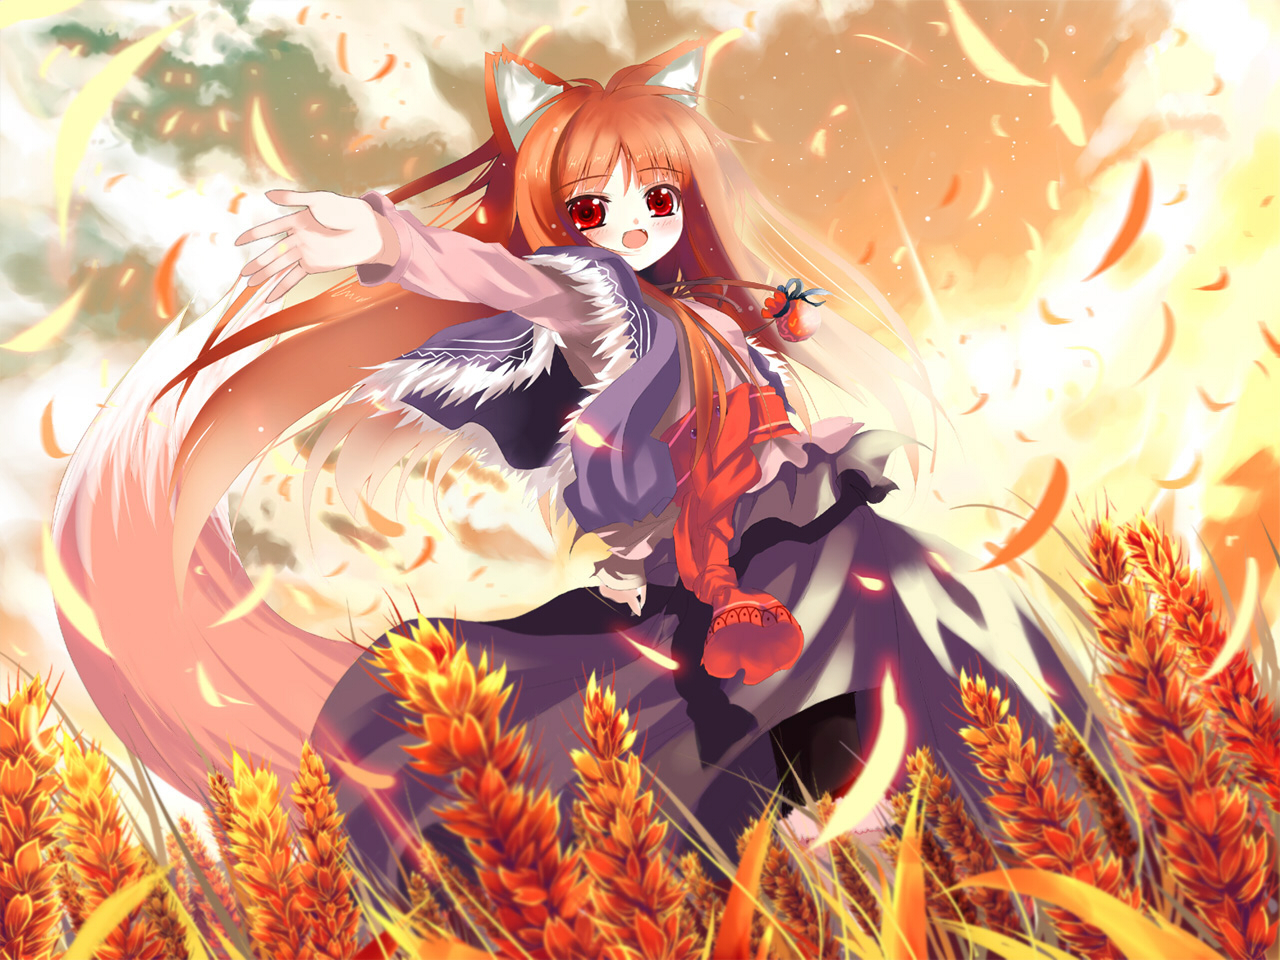 Anime Spice And Wolf Horo Wallpaper Full HD